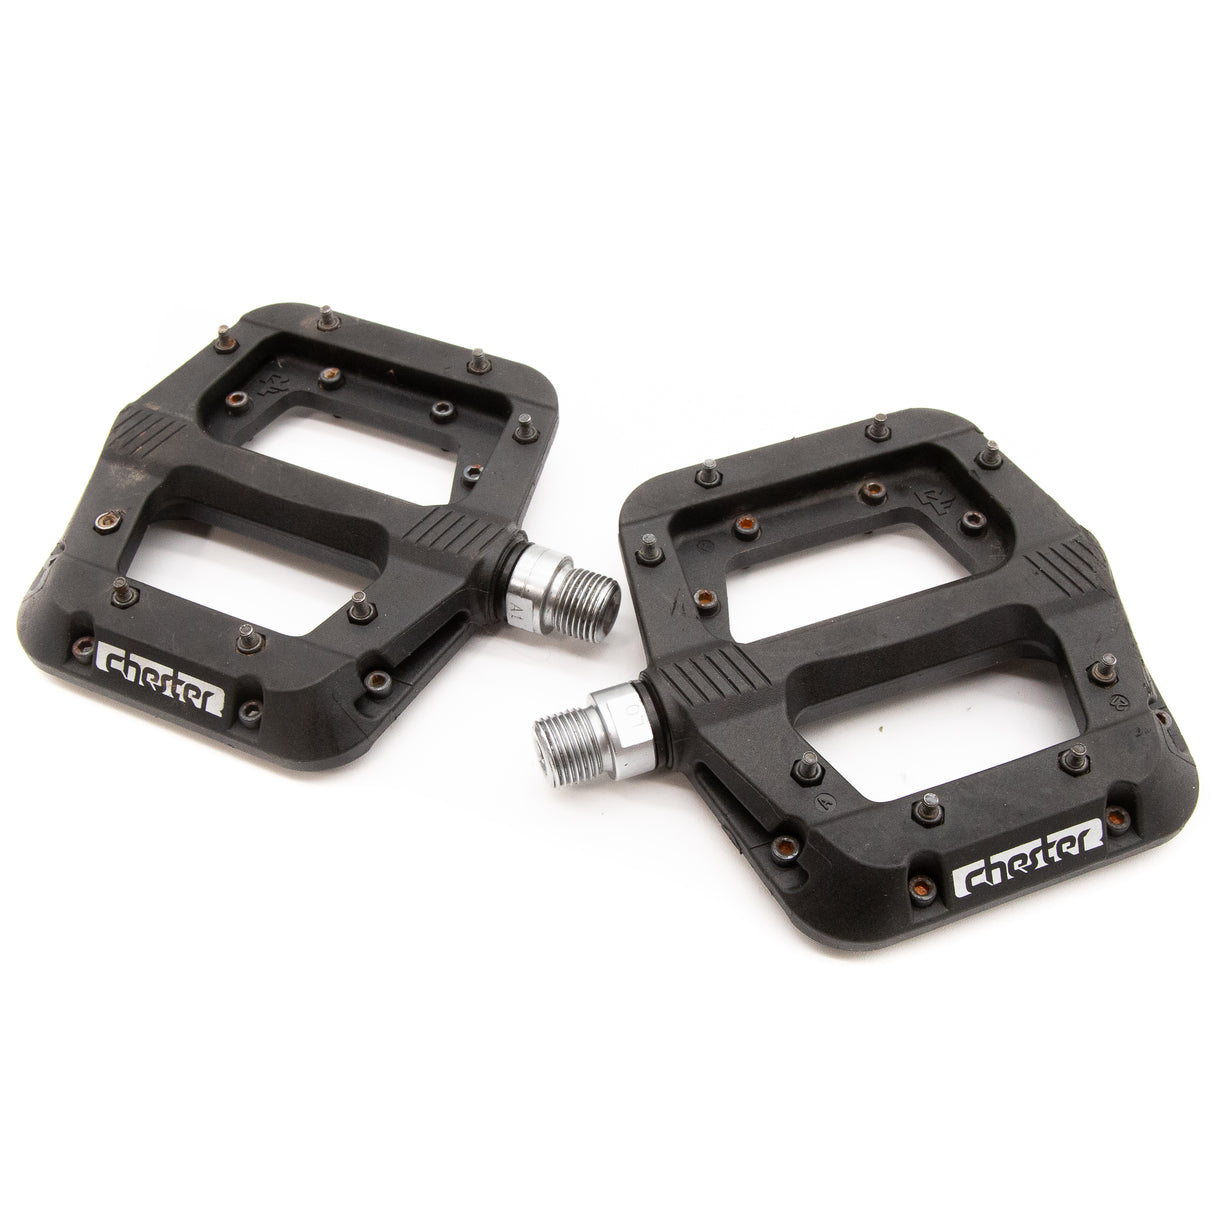 Race Face Chester Flat Black Pedals 364g